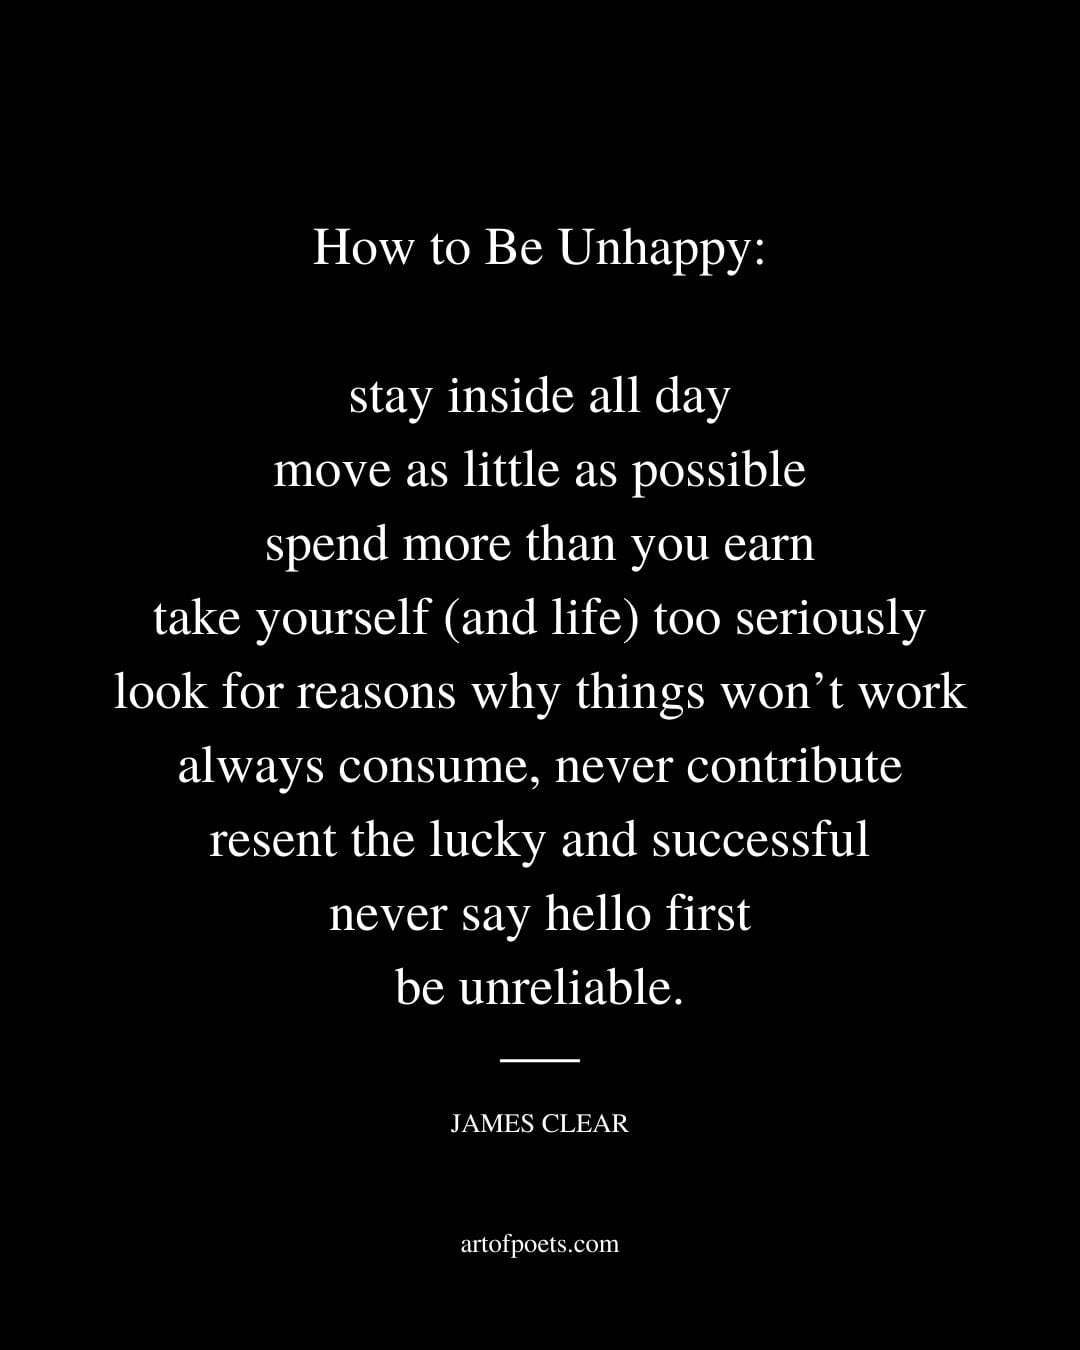 How to Be Unhappy stay inside all day move as little as possible spend more than you earn